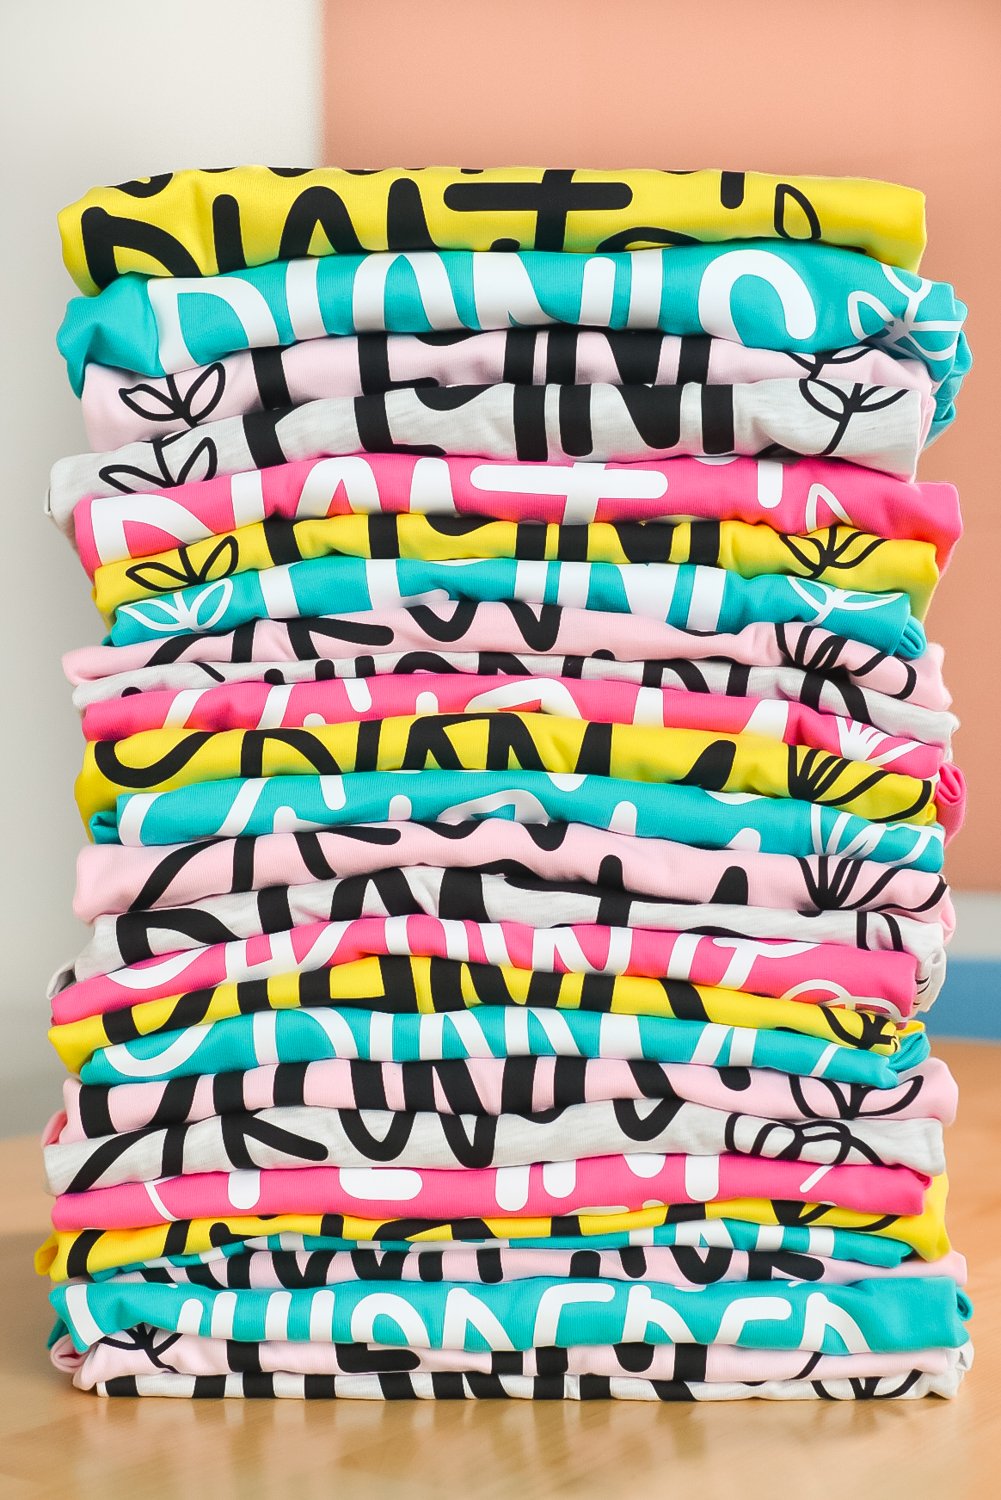 Batching crafts: stack of colorful shirts made with Cricut Venture